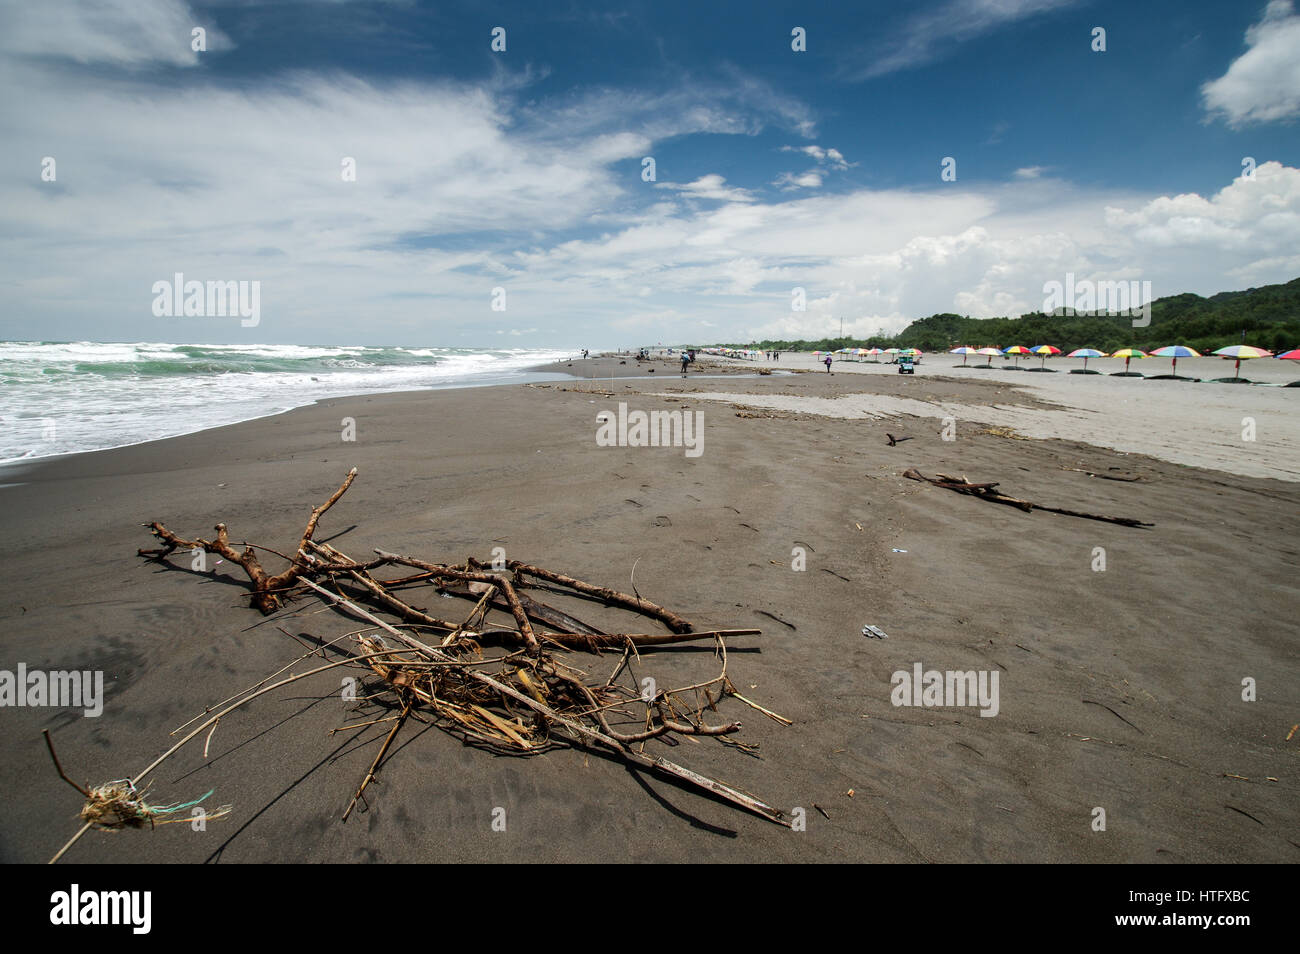 Tangled driftwood on Parangtritis Beach in Central Java, Indonesia Stock Photo